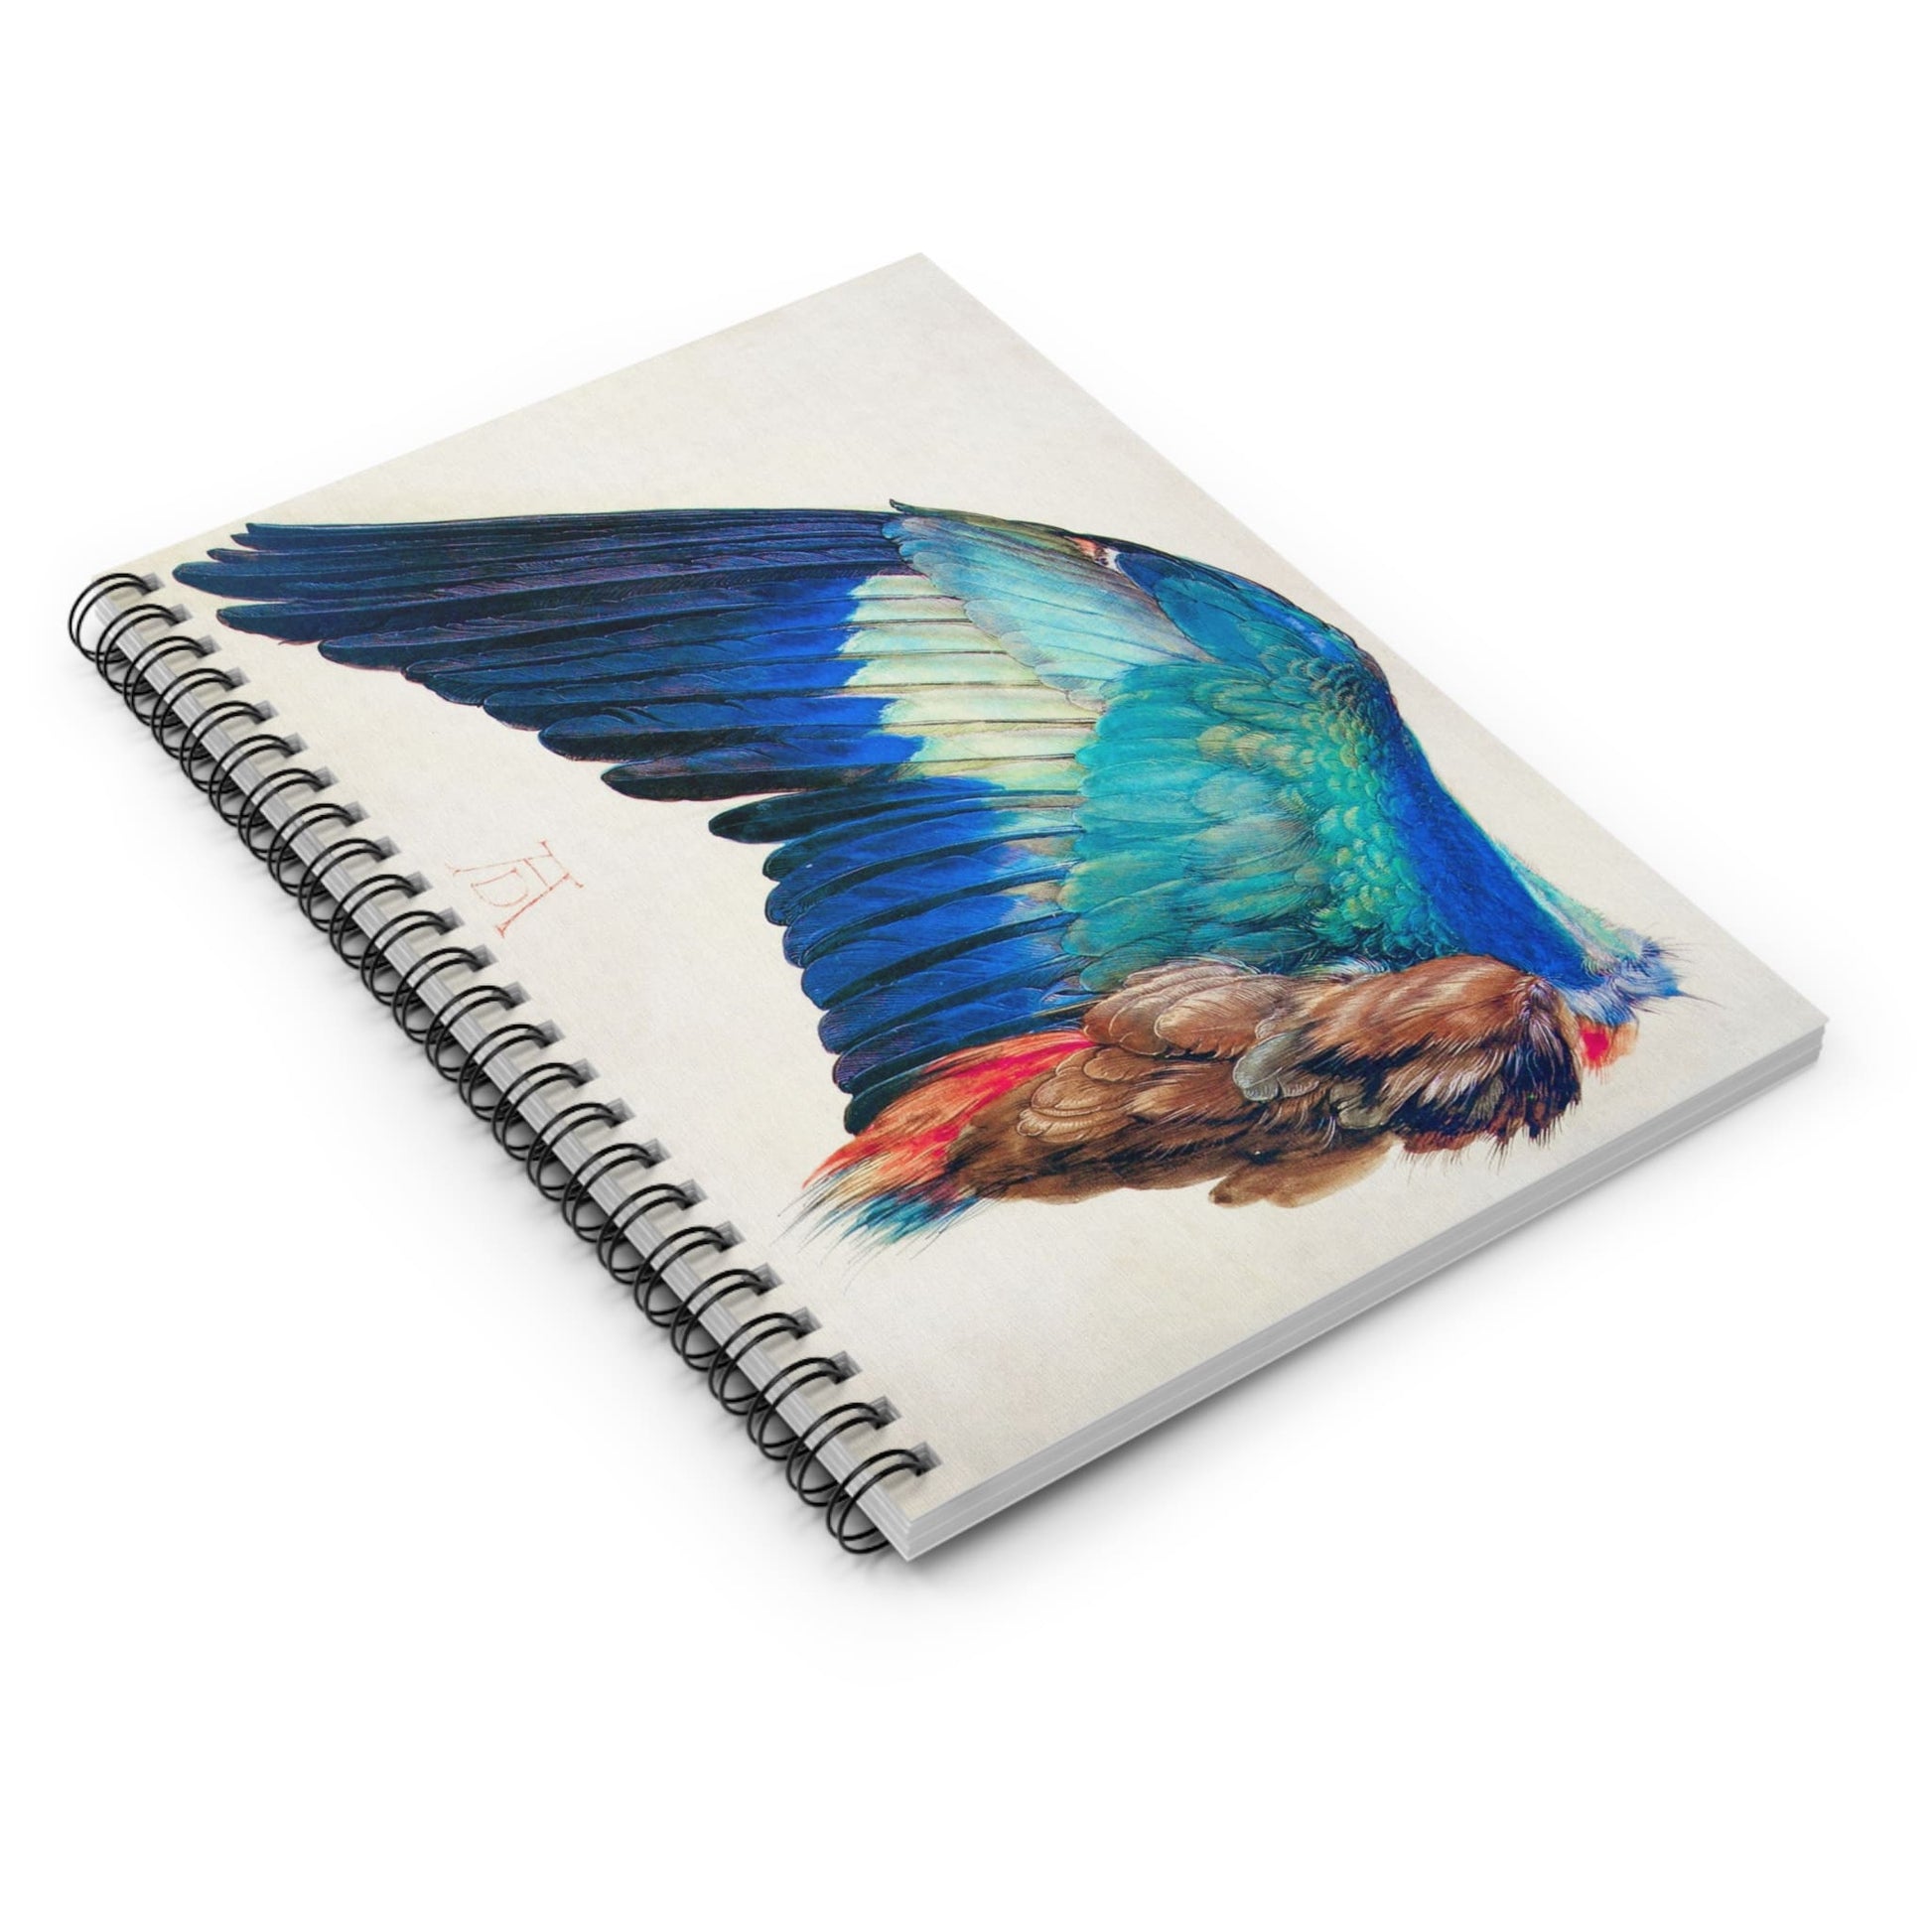 Aesthetic Wing Spiral Notebook Laying Flat on White Surface